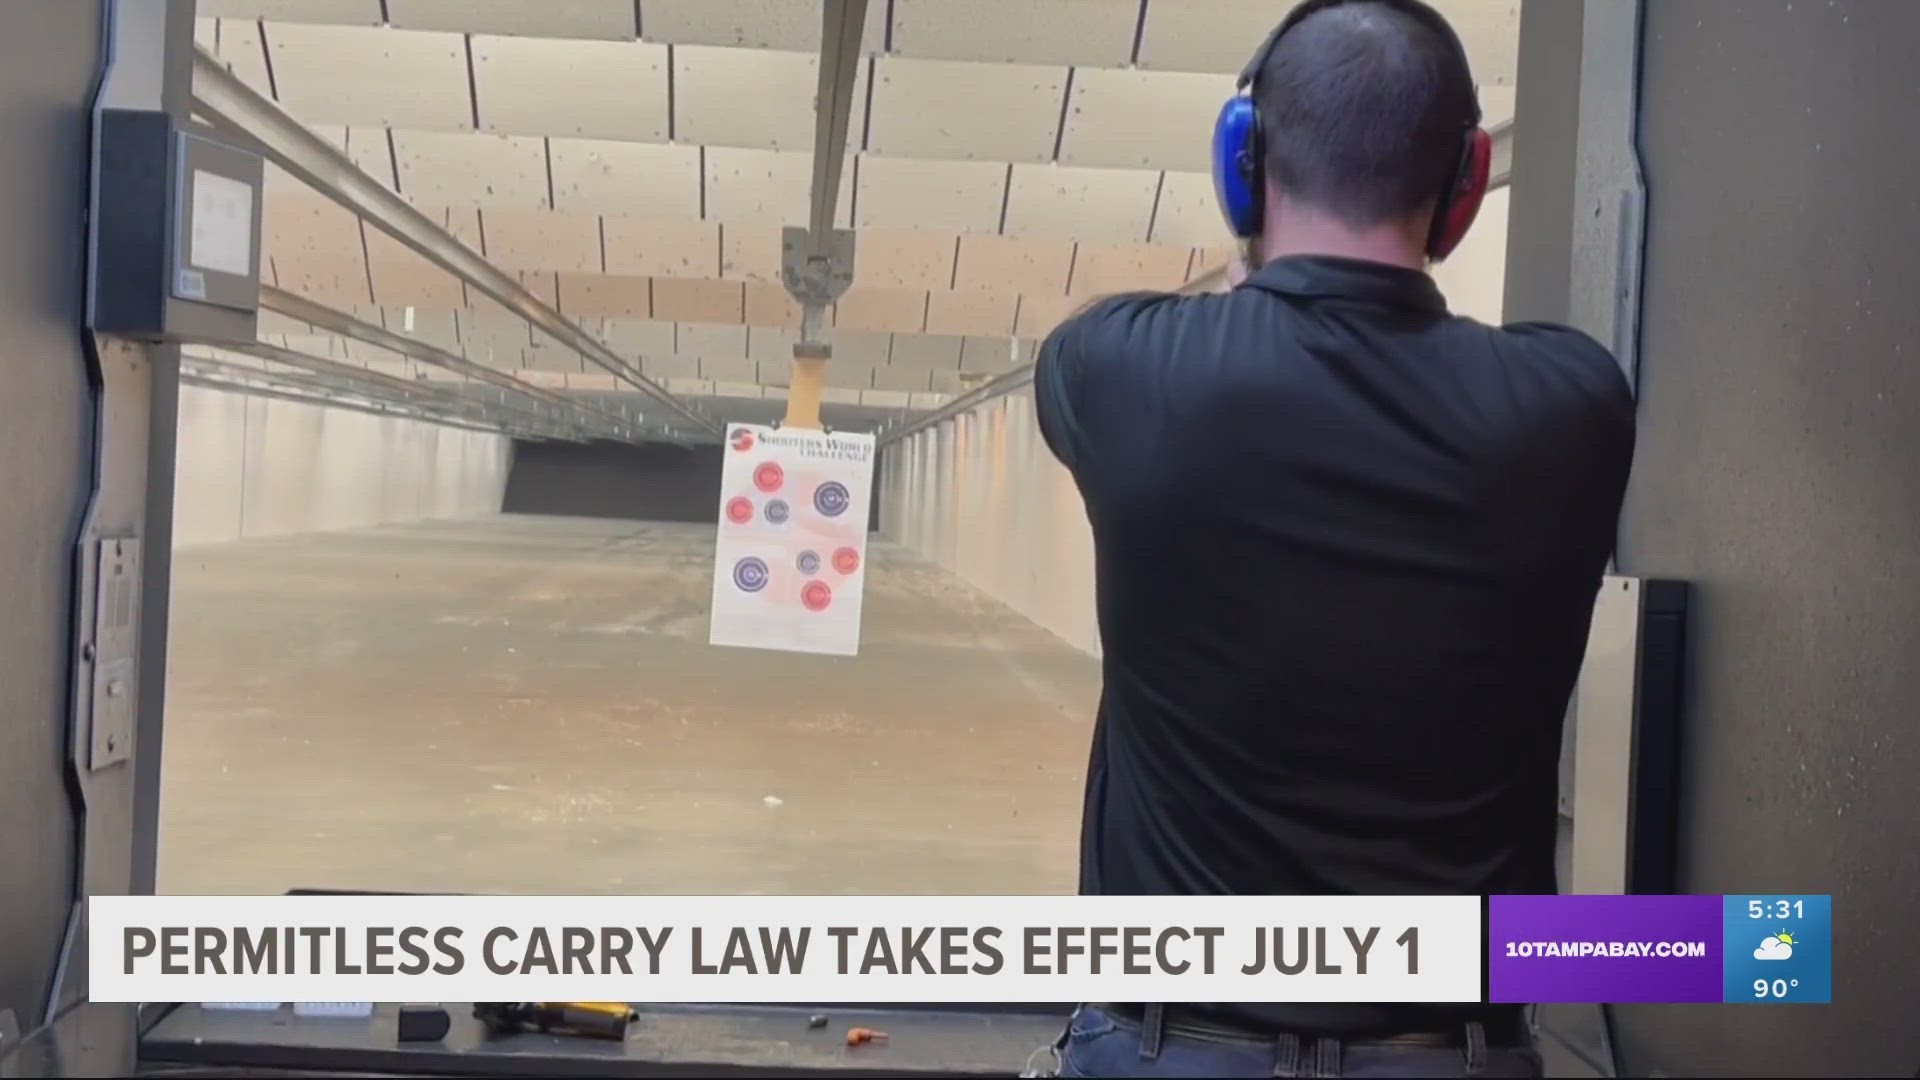 The new law takes effect July 1 and experts are urging gun owners to get training, even if it's no longer legally required.